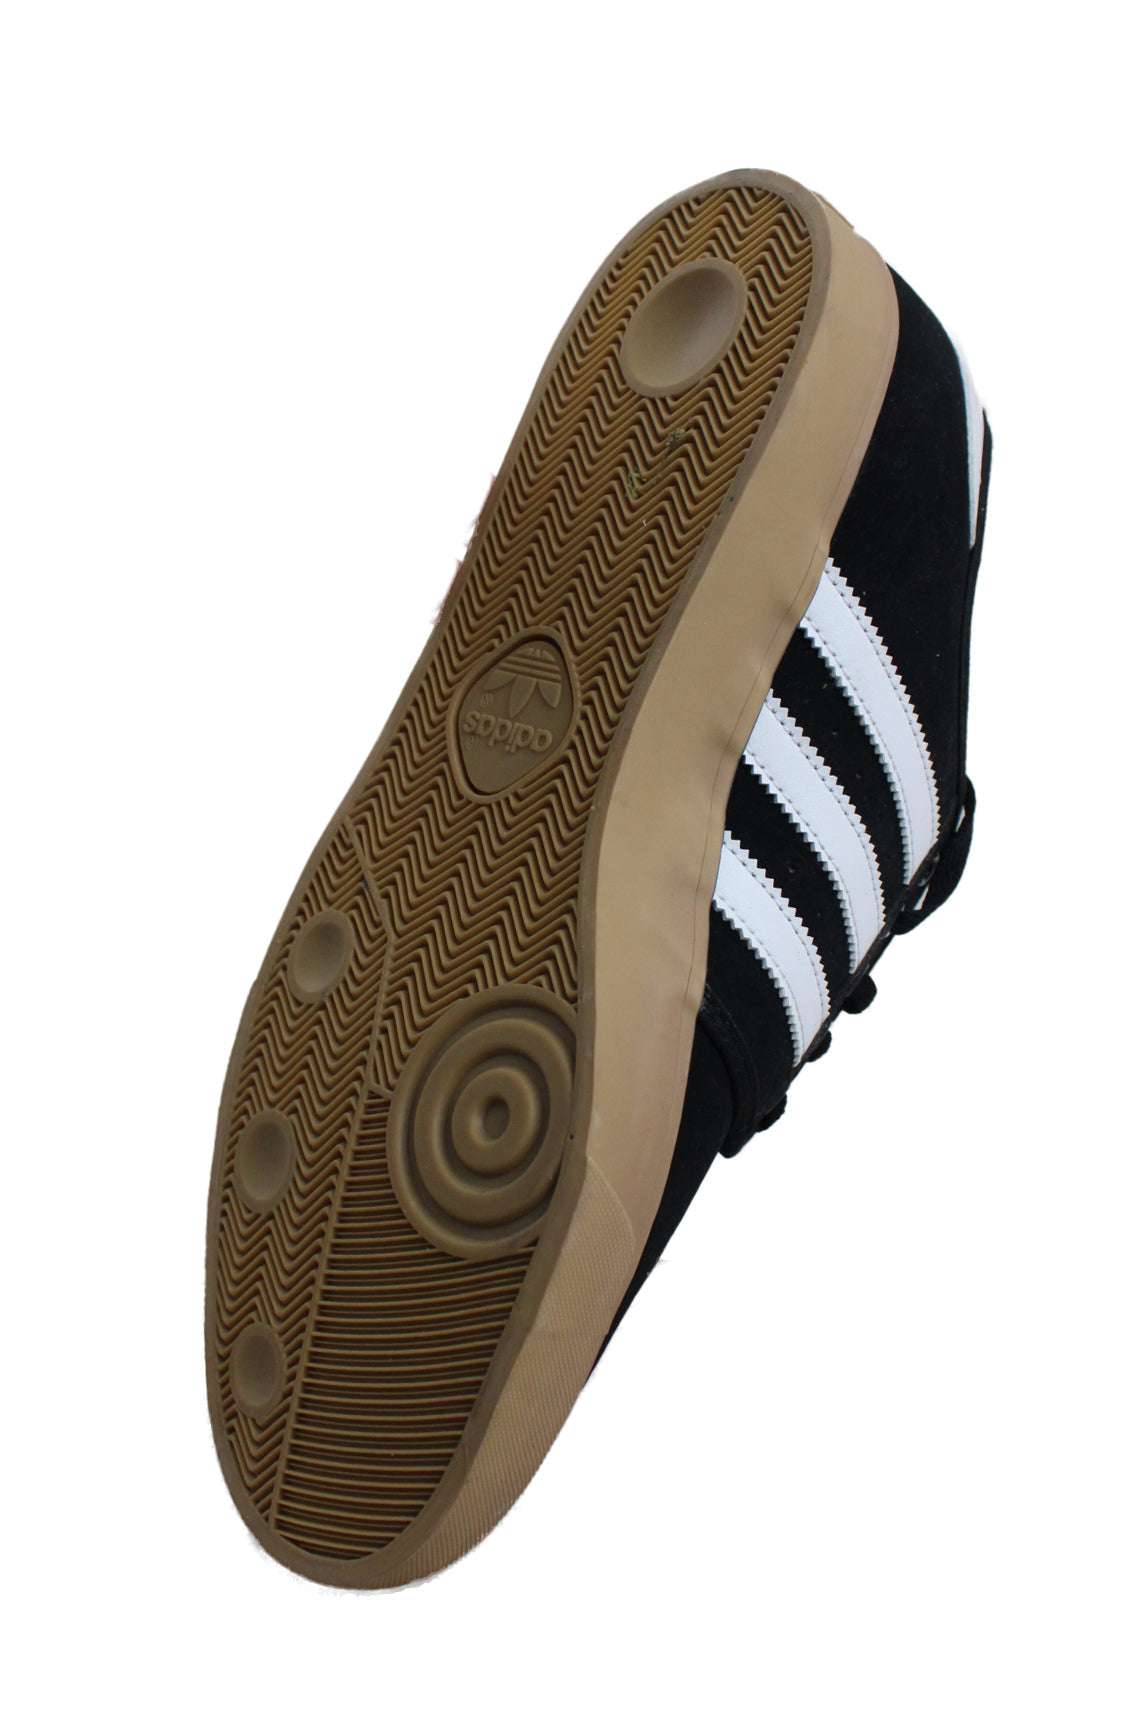 under angle of rubber soled shoes. features text 'adidas' on sole. 